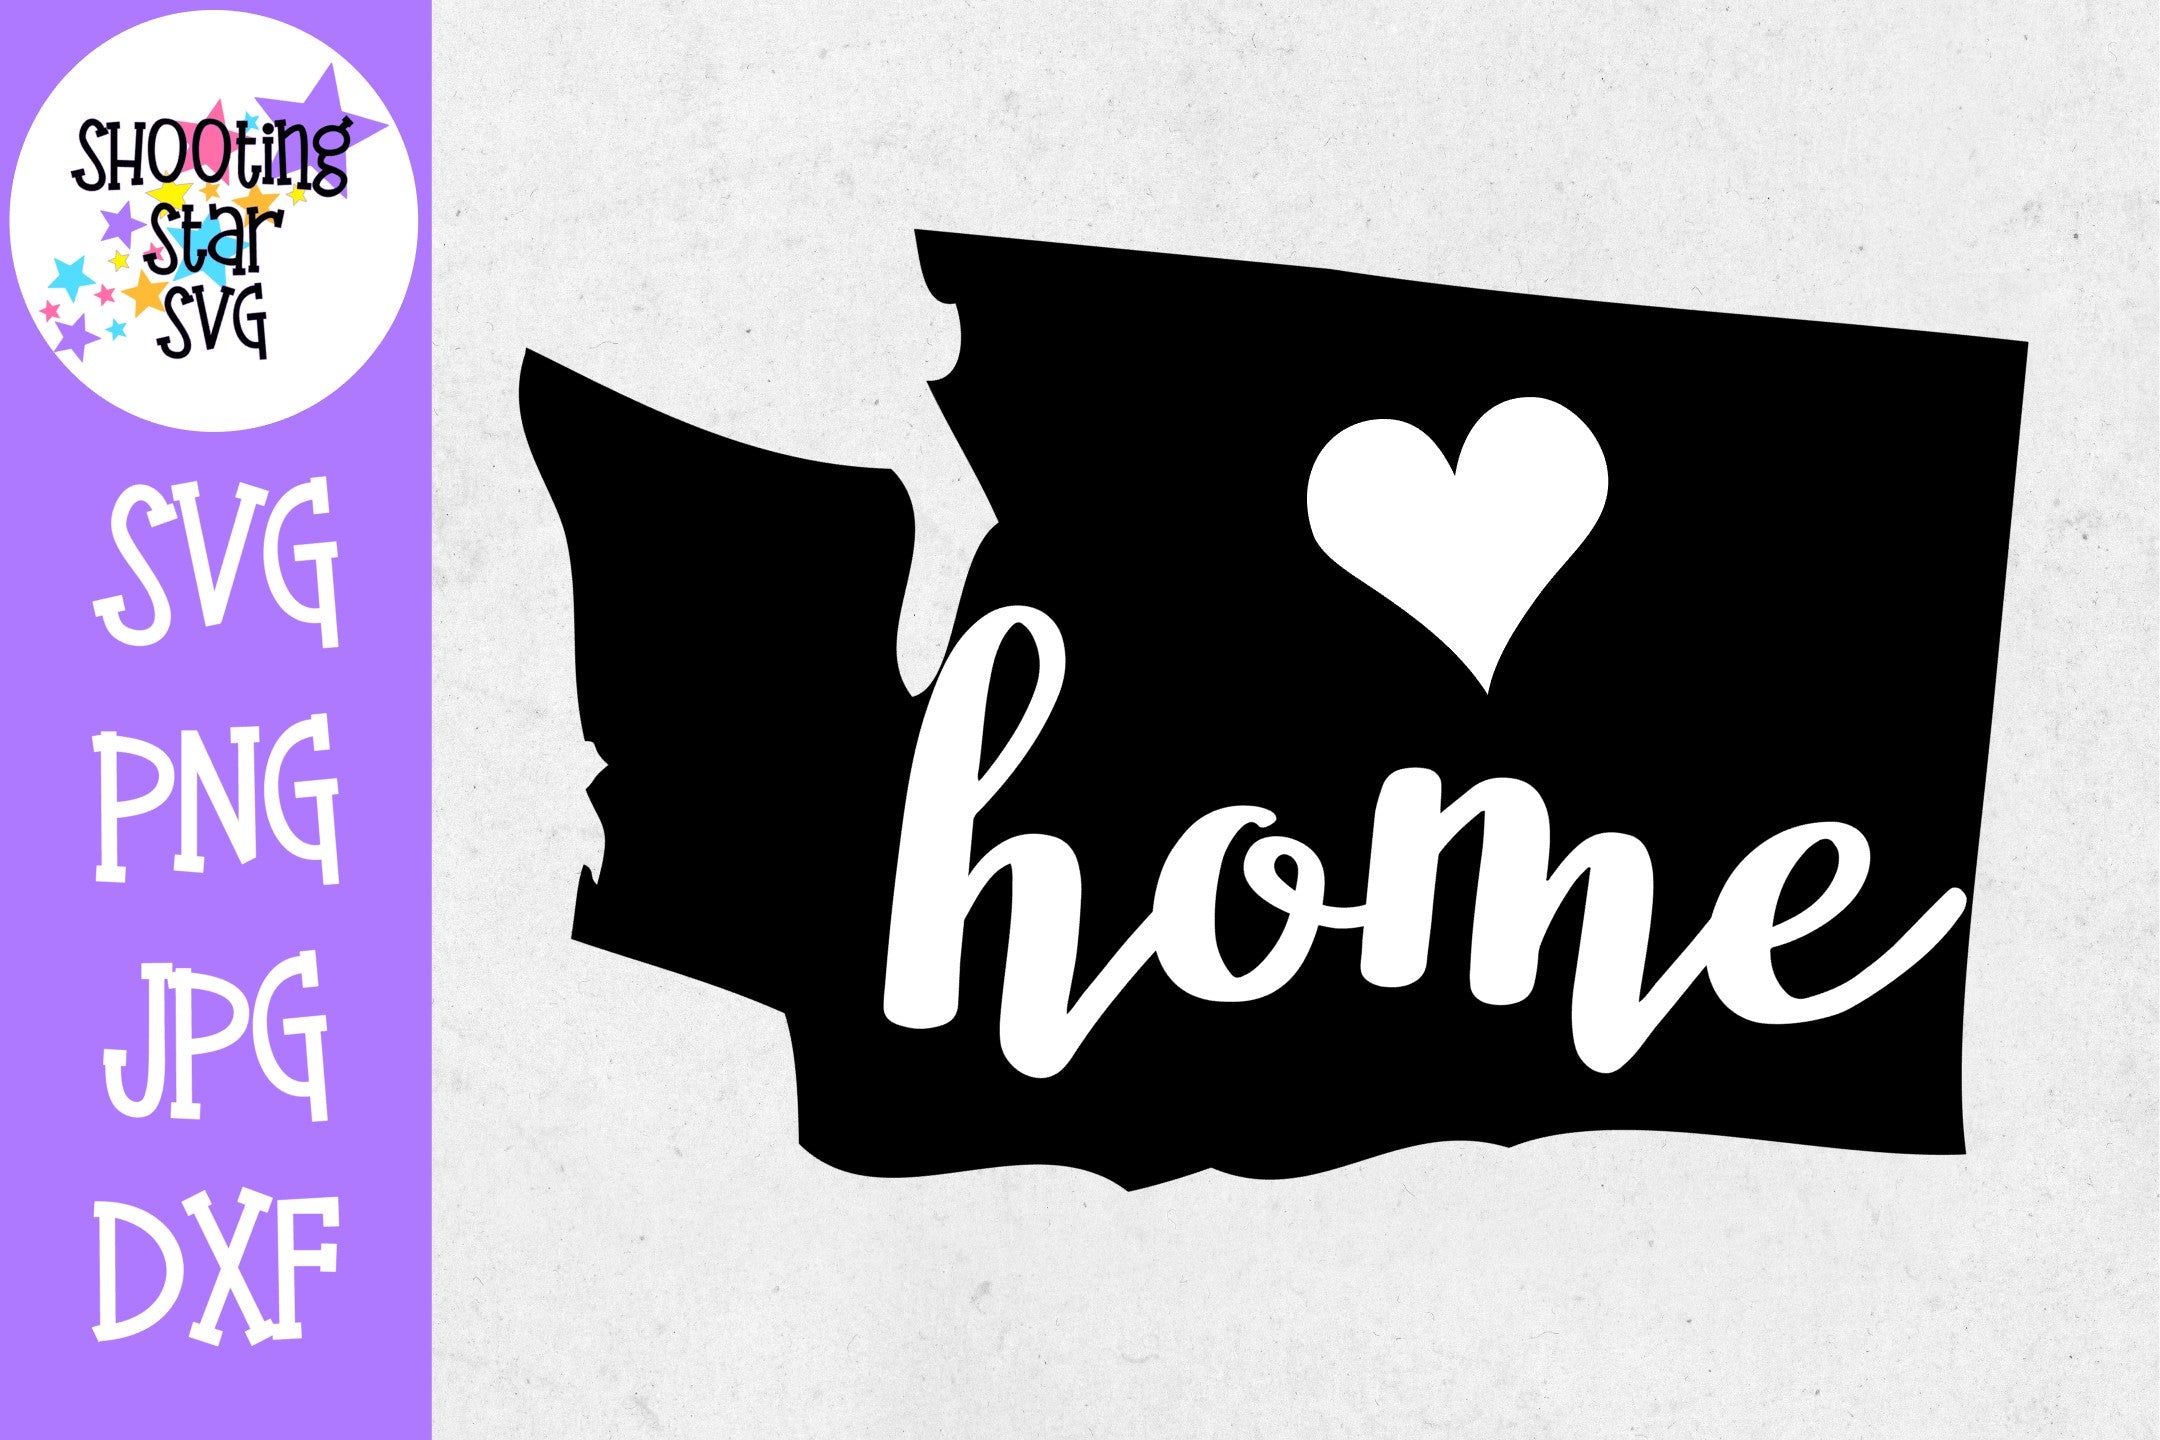 Washington State Home with Heart SVG - 50 States SVG - United States SVG